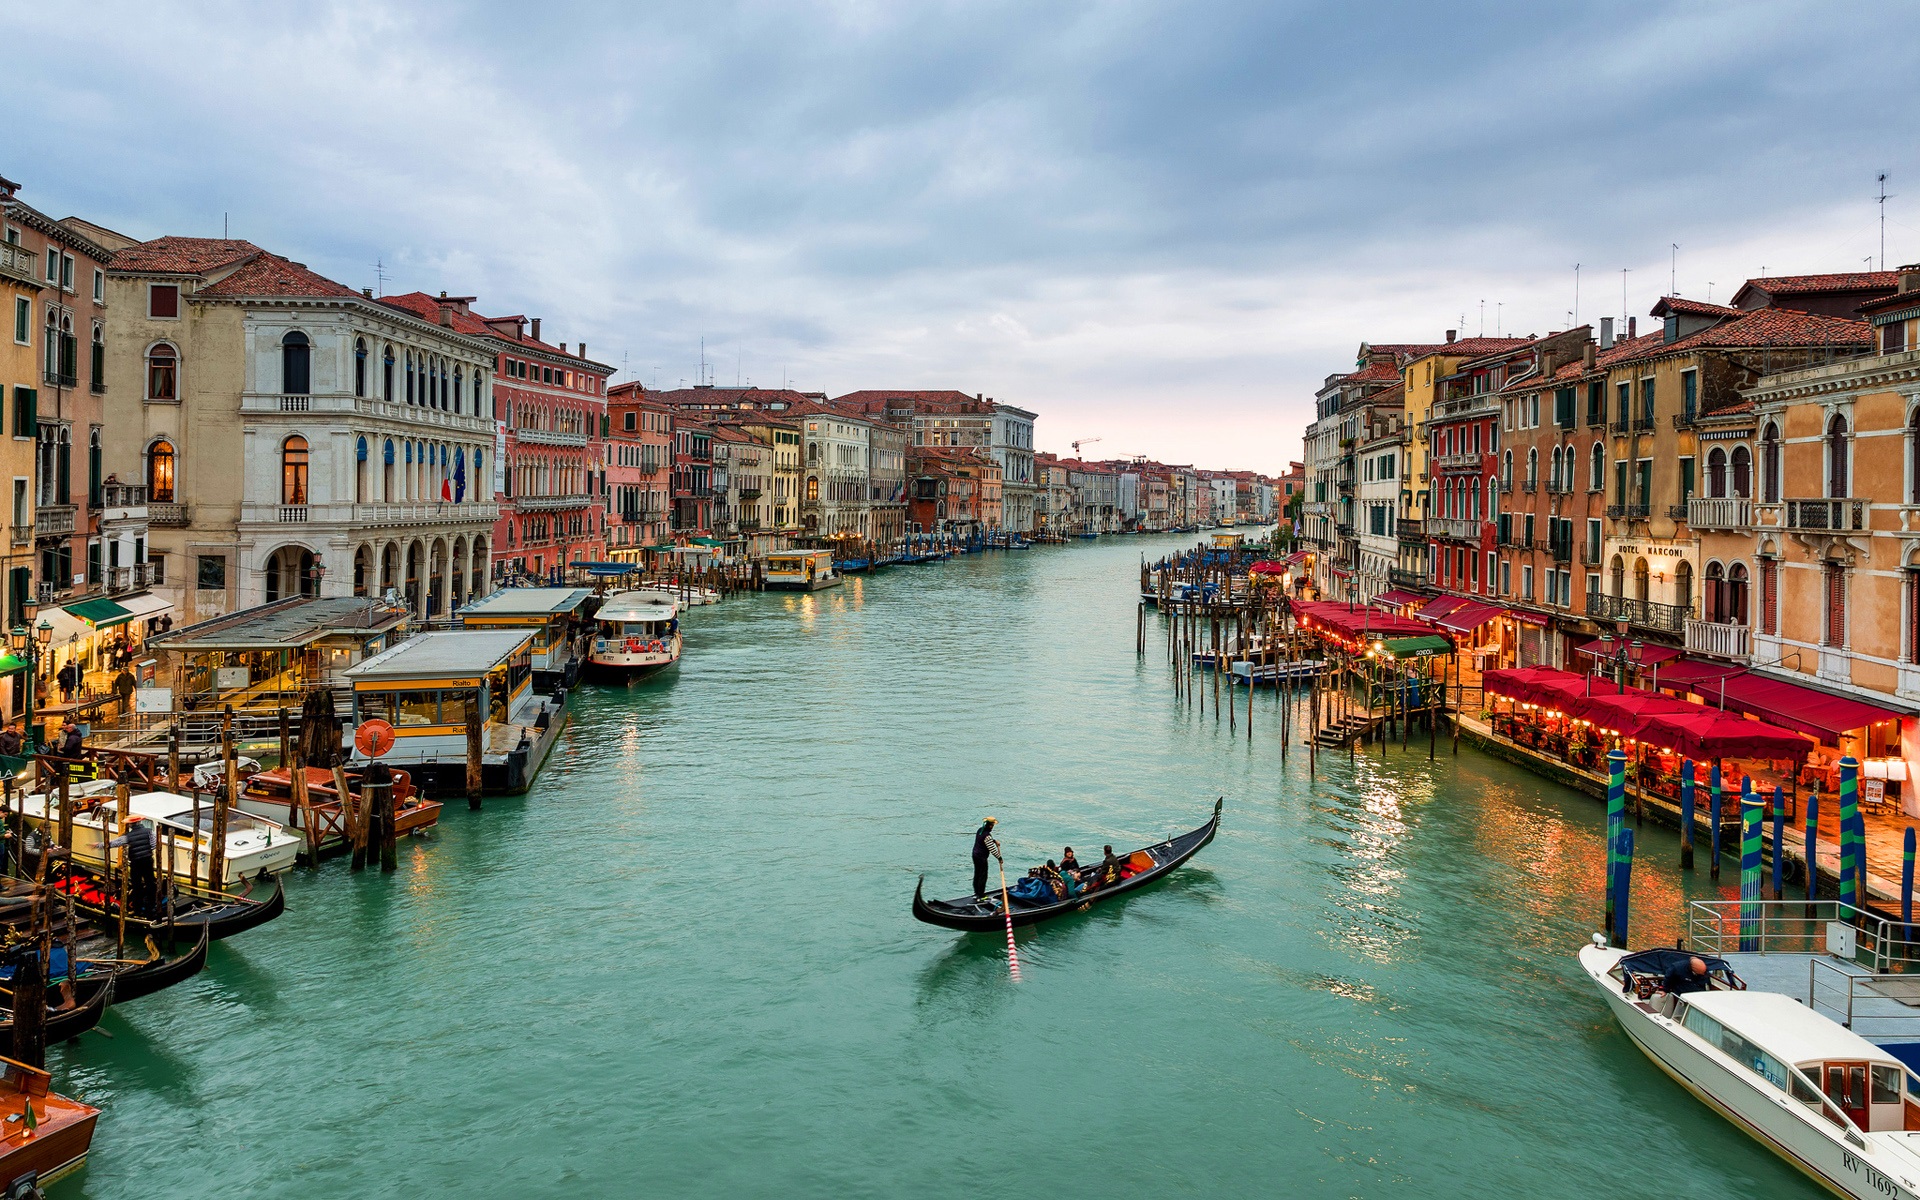 man made, venice, architecture, building, gondola, grand canal, italy, cities